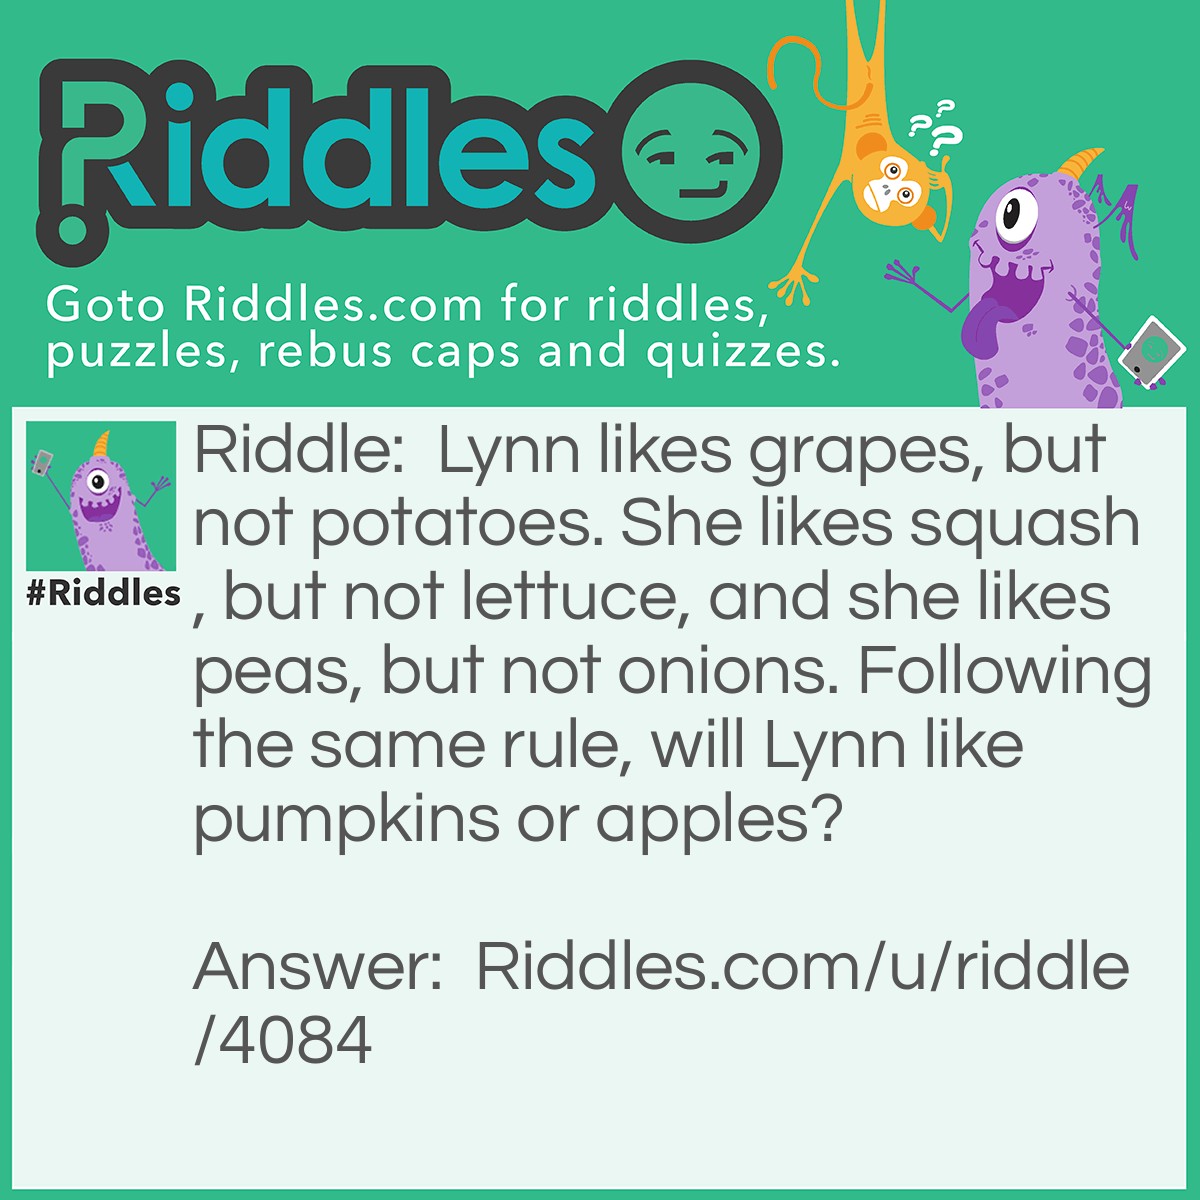 Riddle: Lynn likes grapes, but not potatoes. She likes squash, but not lettuce, and she likes peas, but not onions. Following the same rule, will Lynn like pumpkins or apples? Answer: Pumpkins. She only likes things that grow on vines.